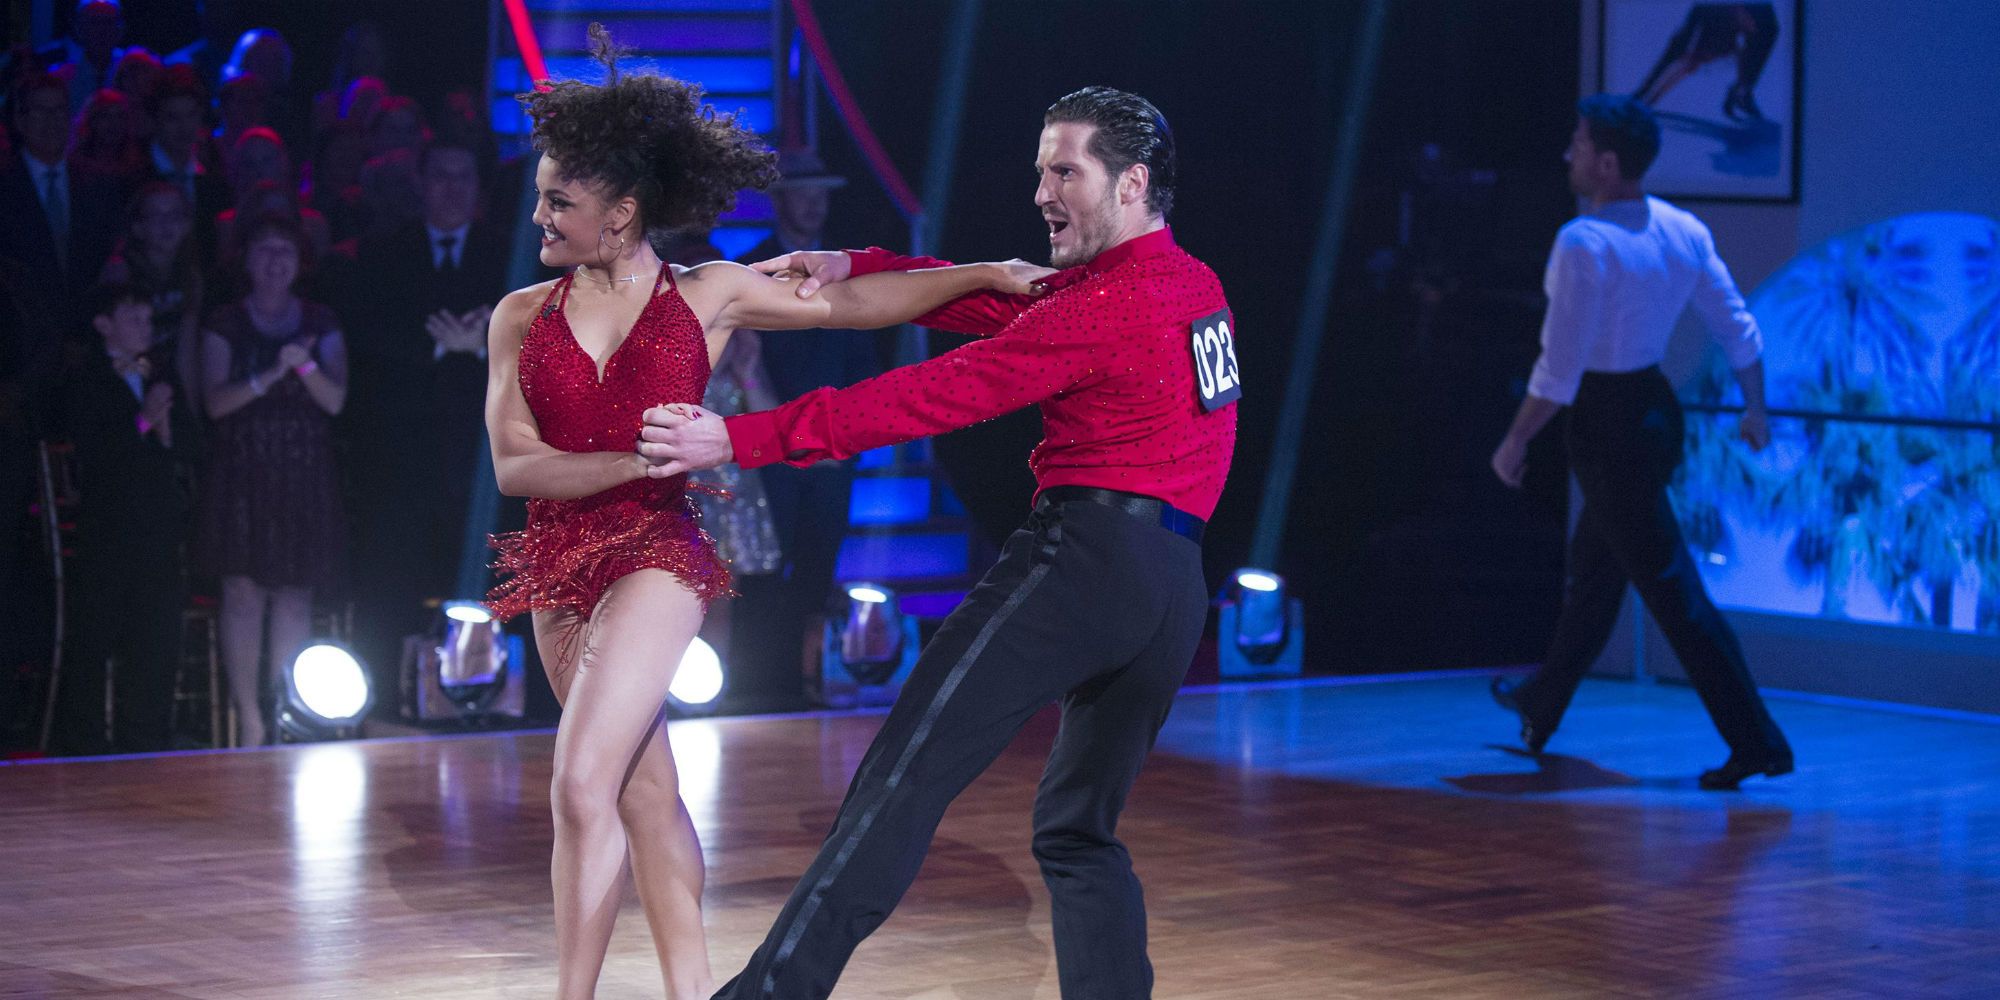 Laurie Hernandez and Val Chmerkovskiy on DWTS season 23